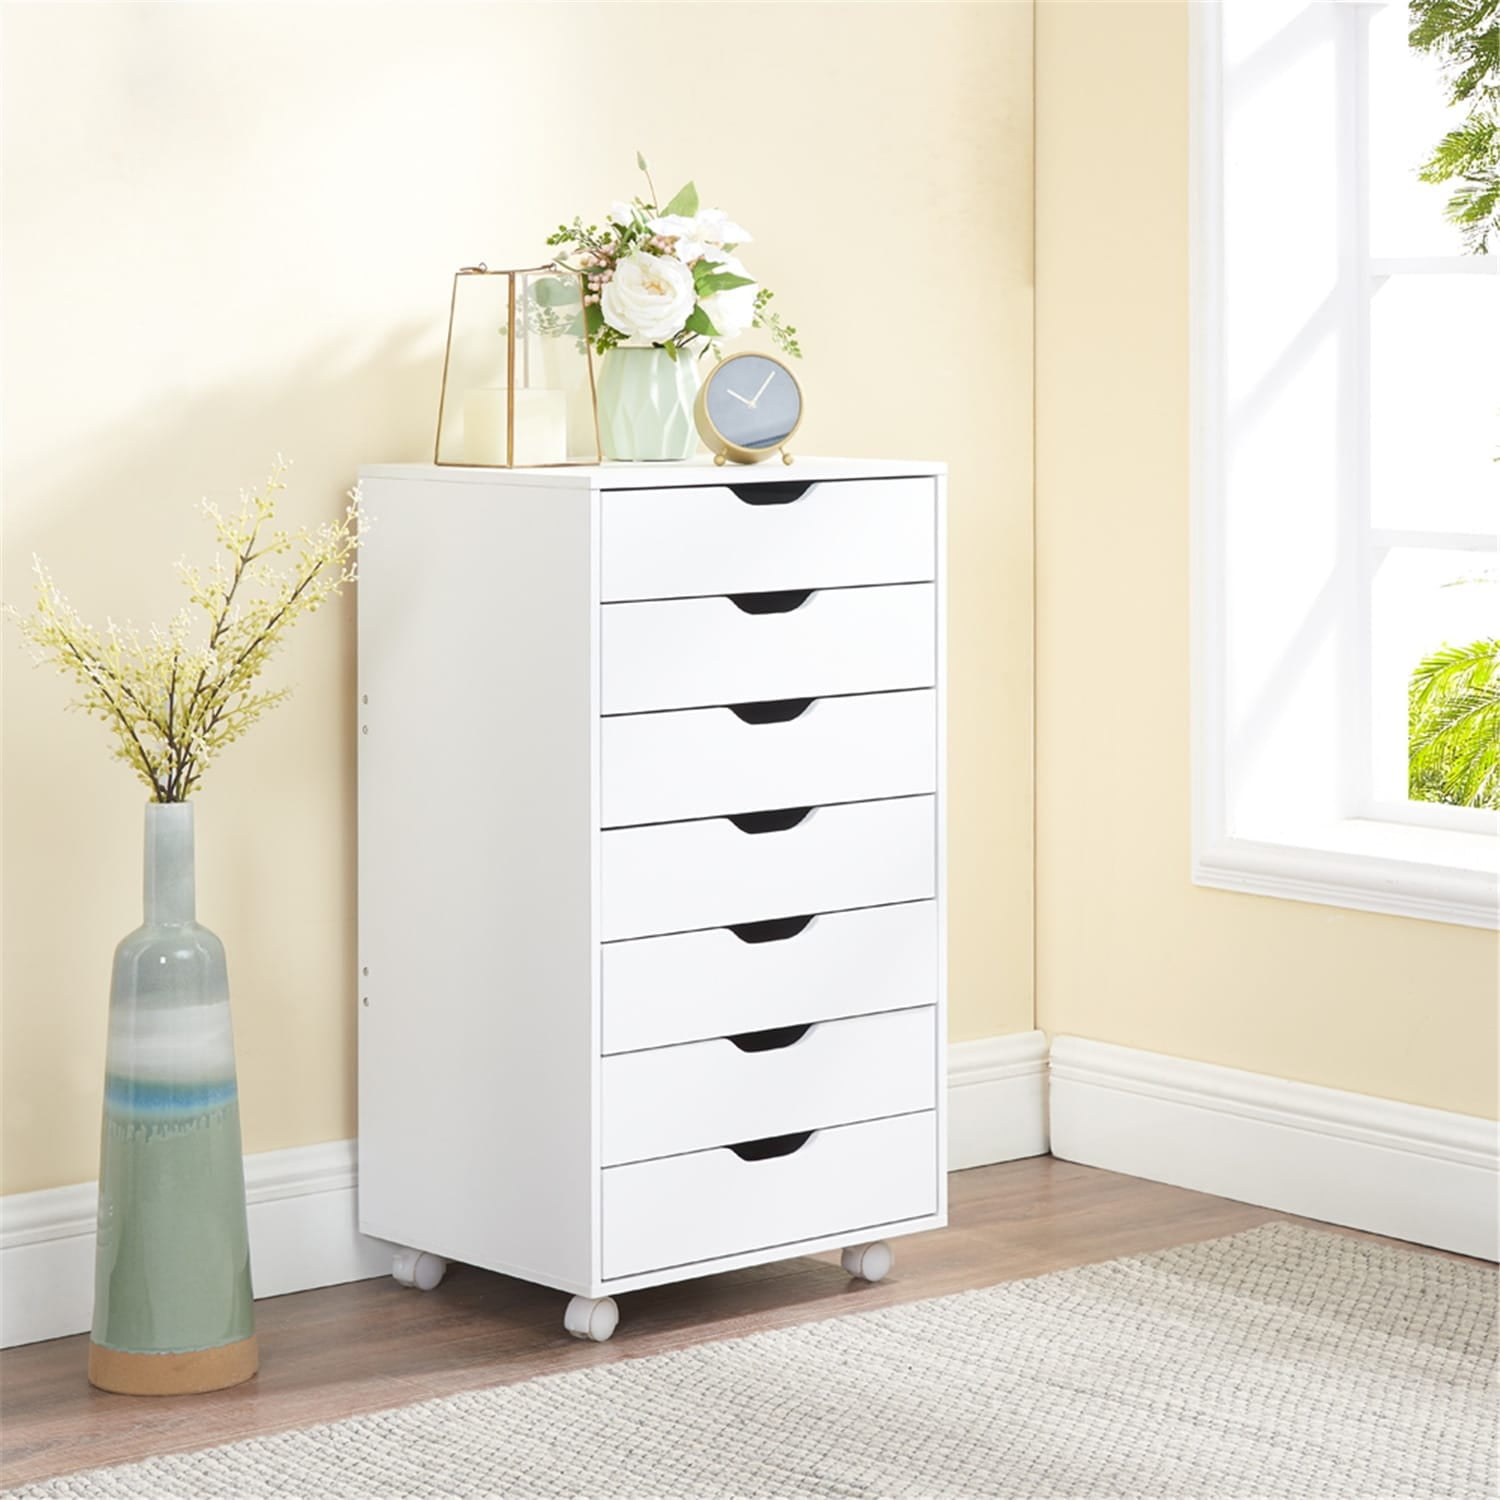 Office File Cabinets Wooden File Cabinets for Home Office Lateral File Cabinet File Cabinet Mobile File Storage Drawer Cabinet White - image 1 of 6